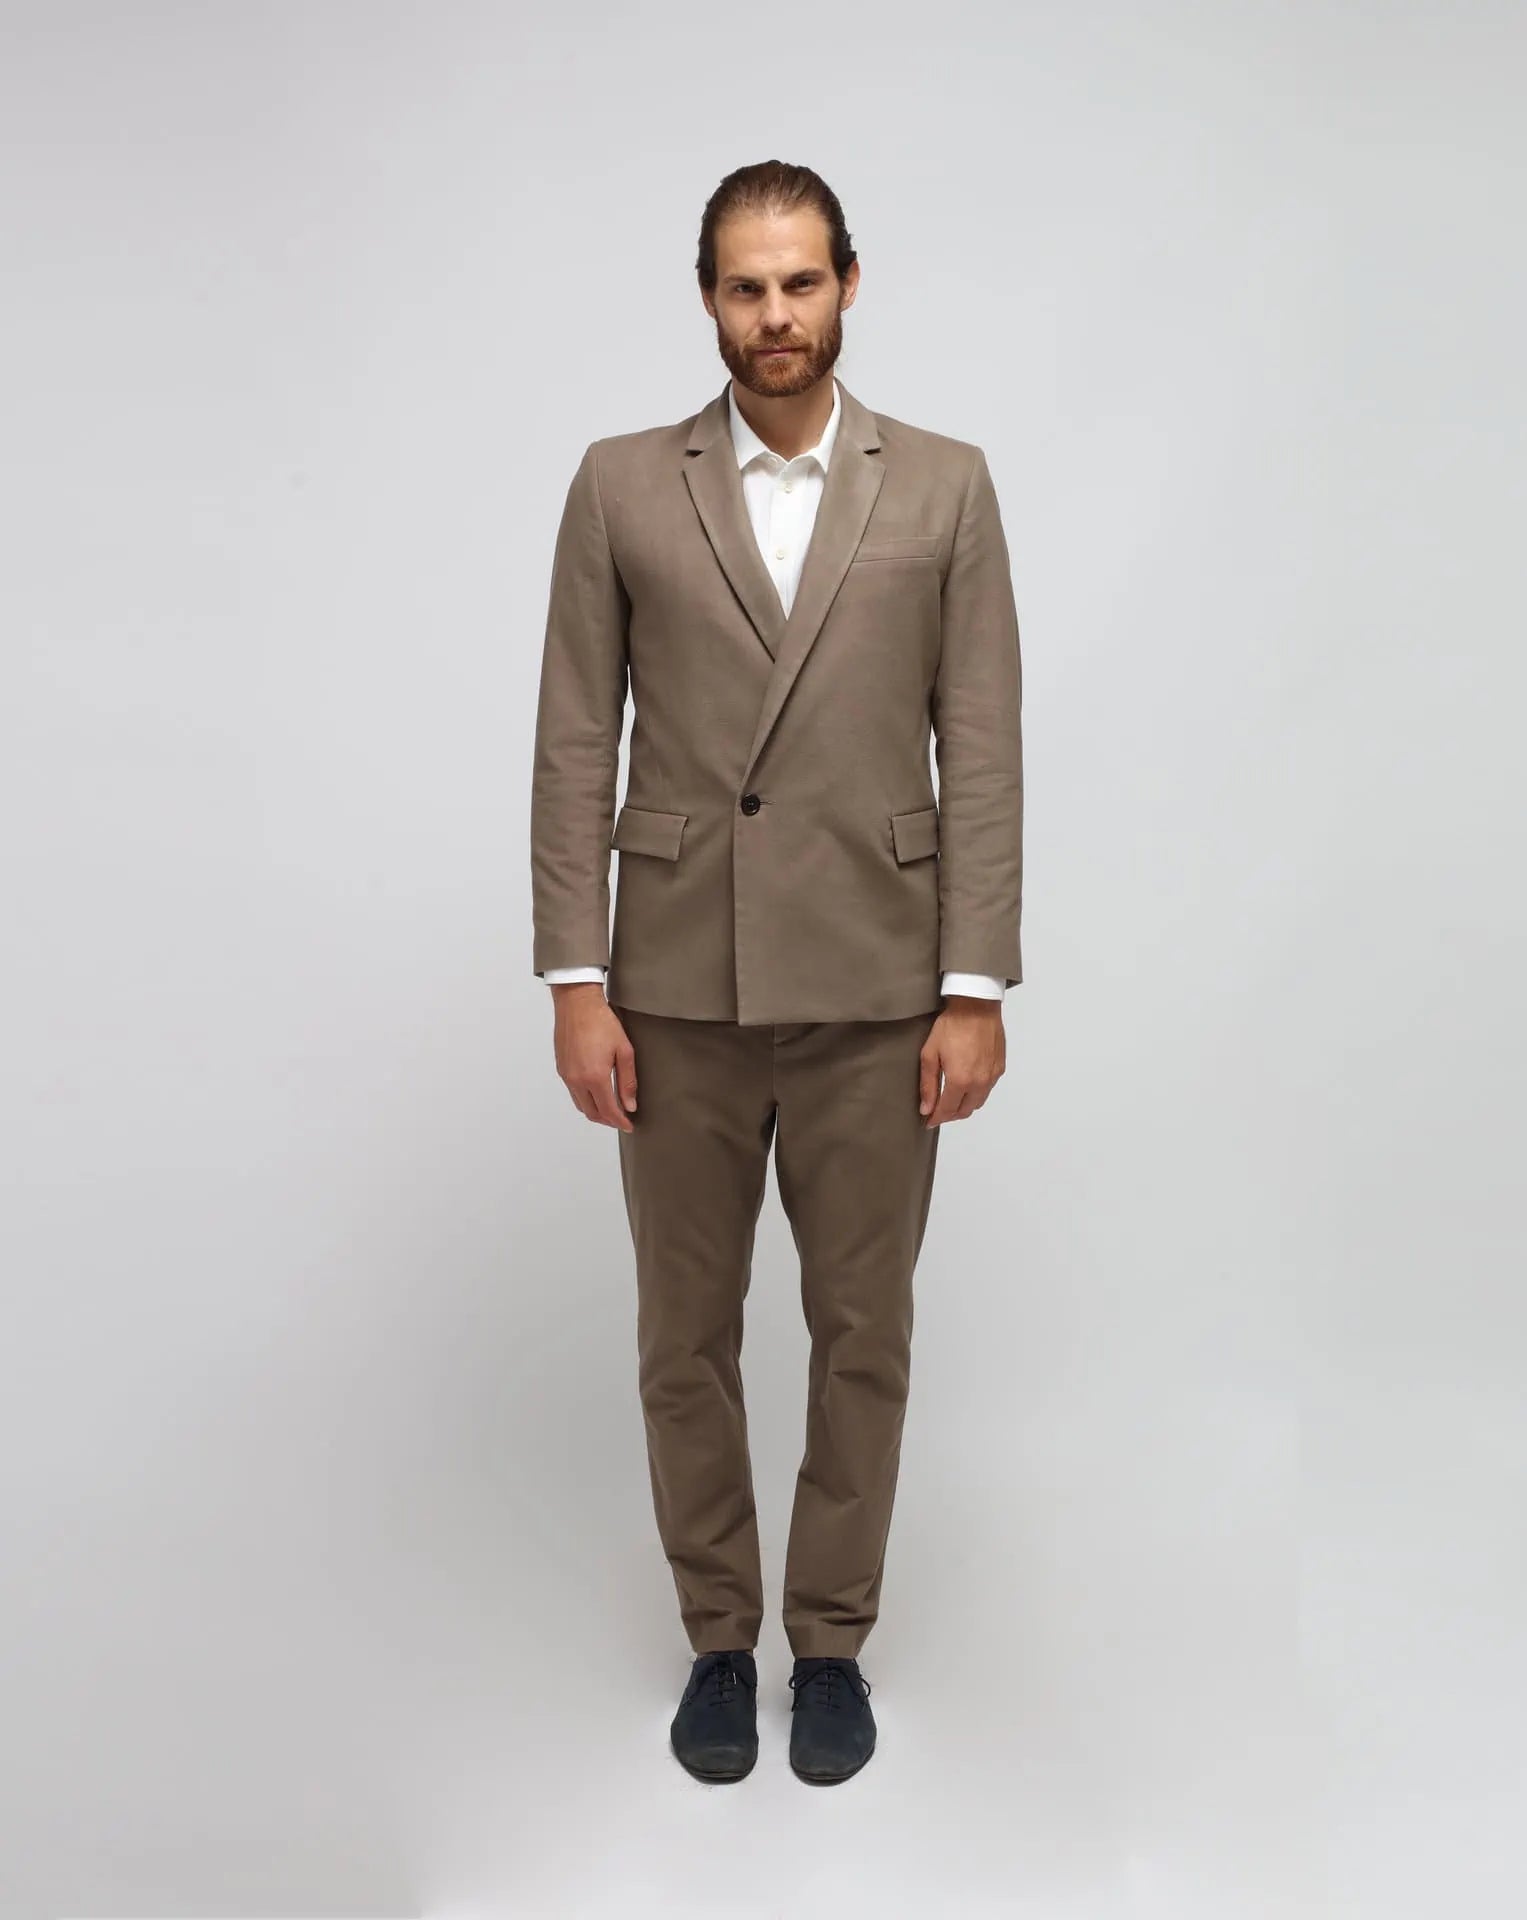 Beige double-breasted suit